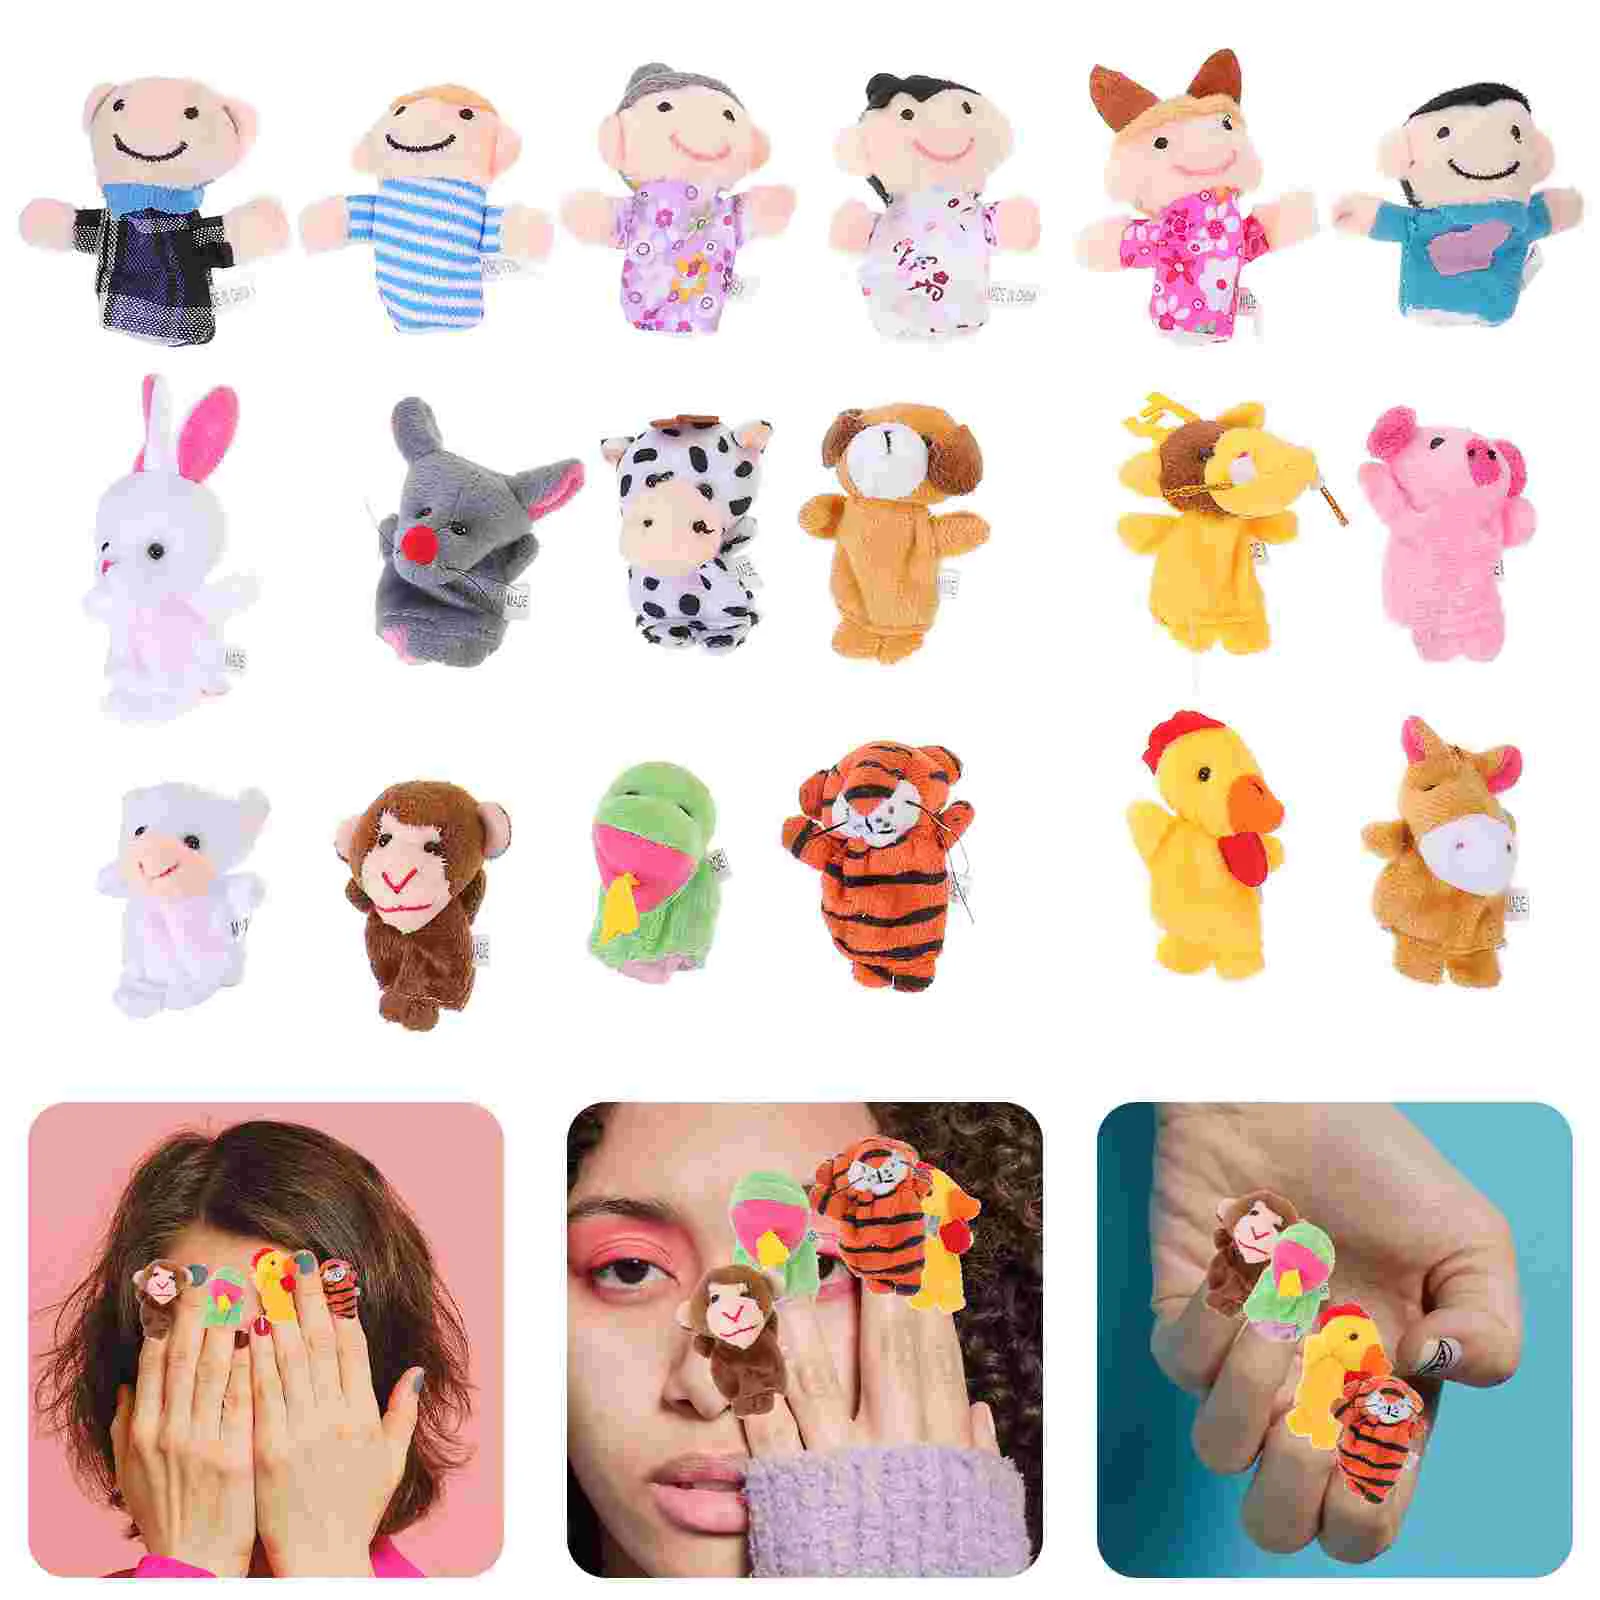 18pcs Plush Finger Puppets Dolls Hand Toys 12 Puppets 6 People(Mixed Style) for Kids Babies Talking Story Birthday Party Favors dropshipping 6pcs baby kid plush cloth play game learn story family finger puppets toys